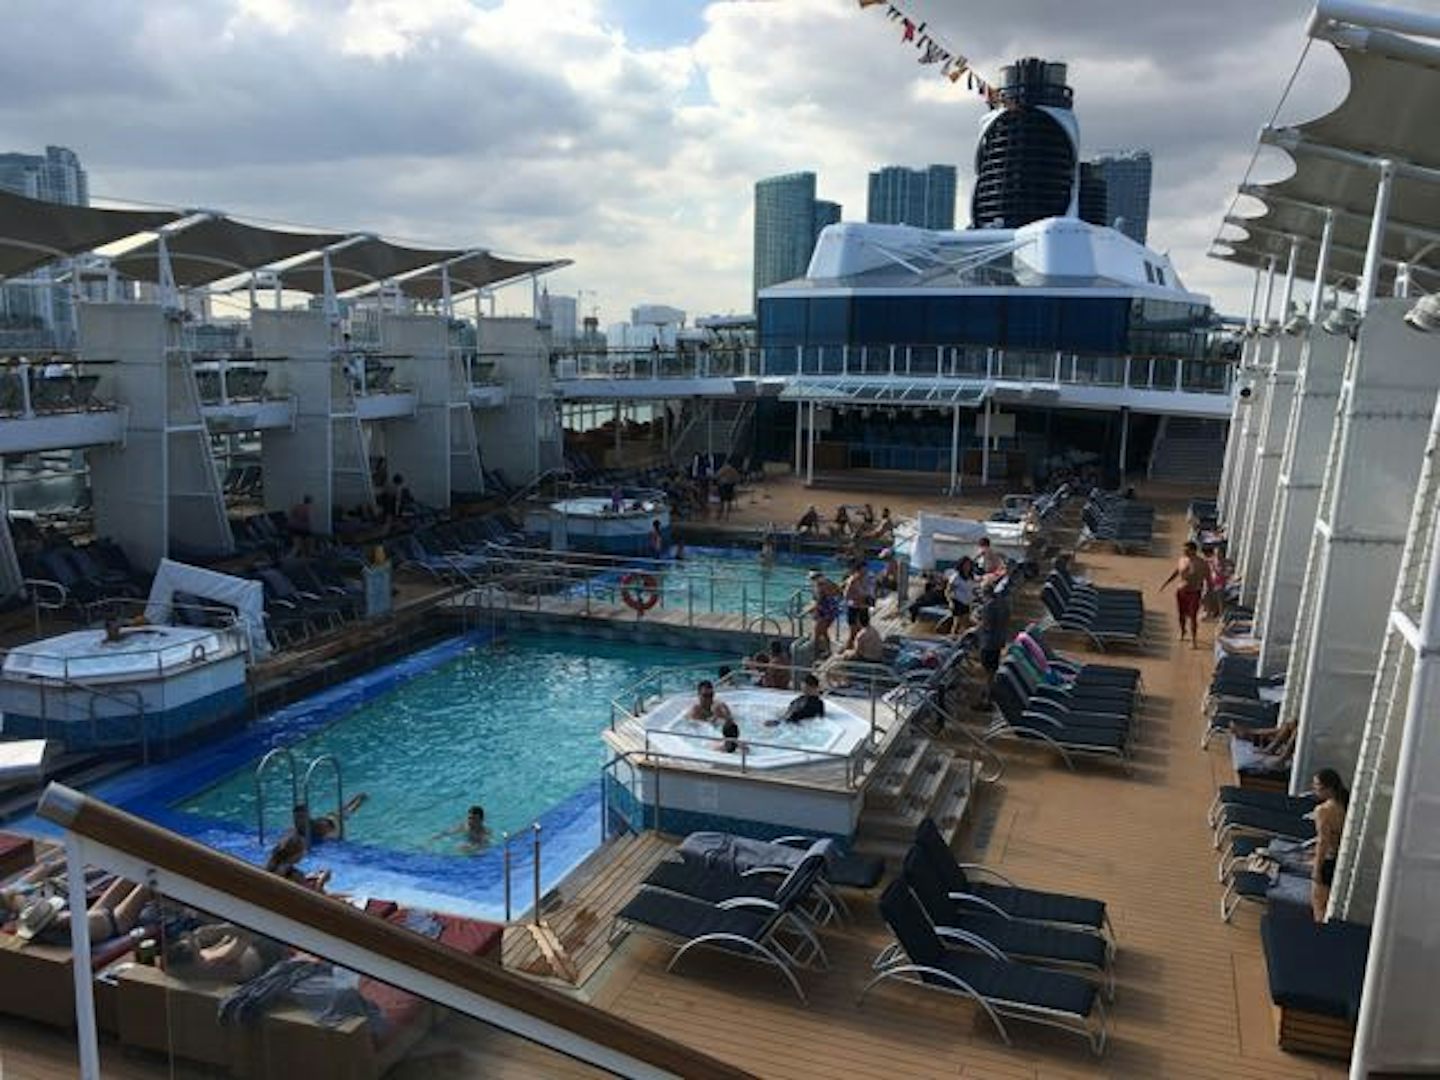 Main Pool area looking aft from Deck 15.